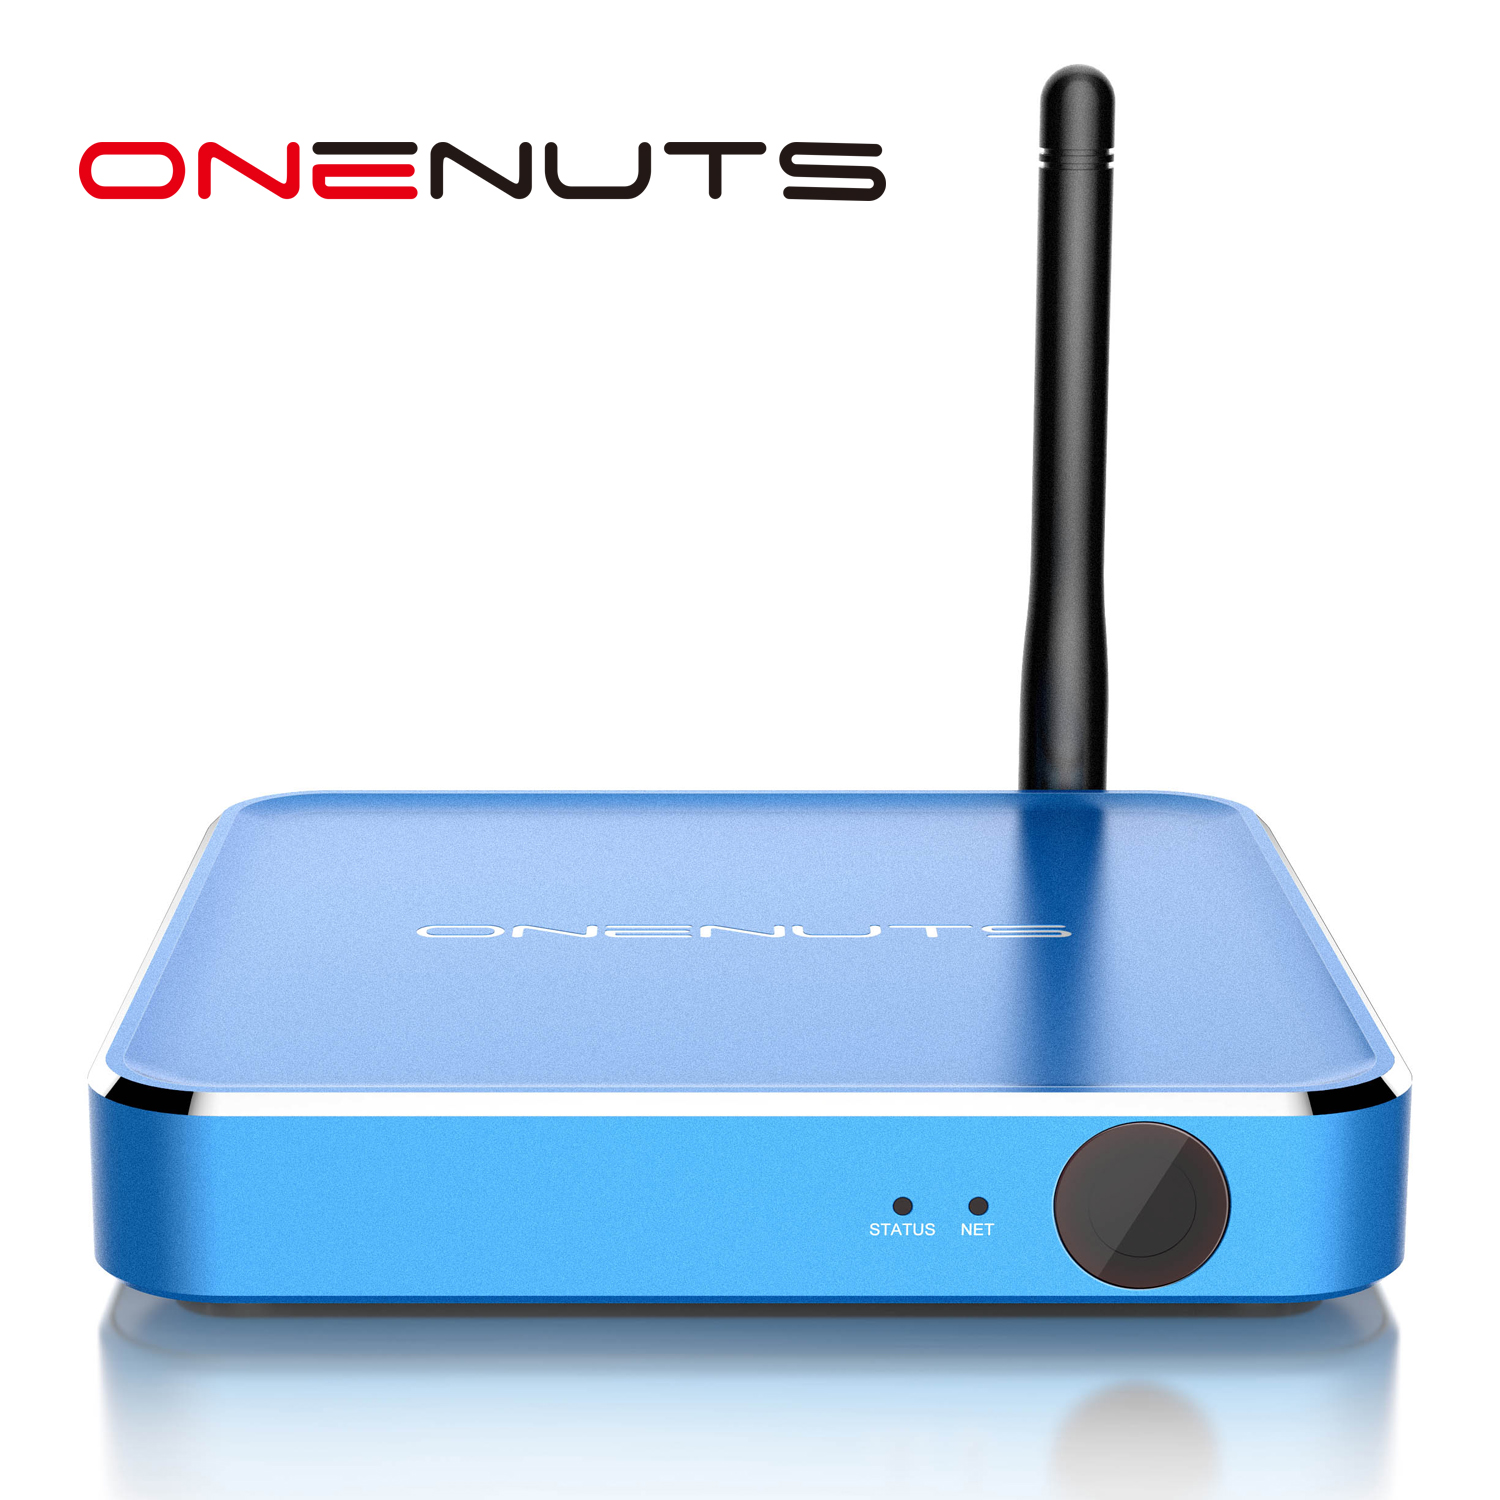 Android IPTV Box supplier Android TV BOX with 3G/4G LTE WCDMA Wireless Module built-in